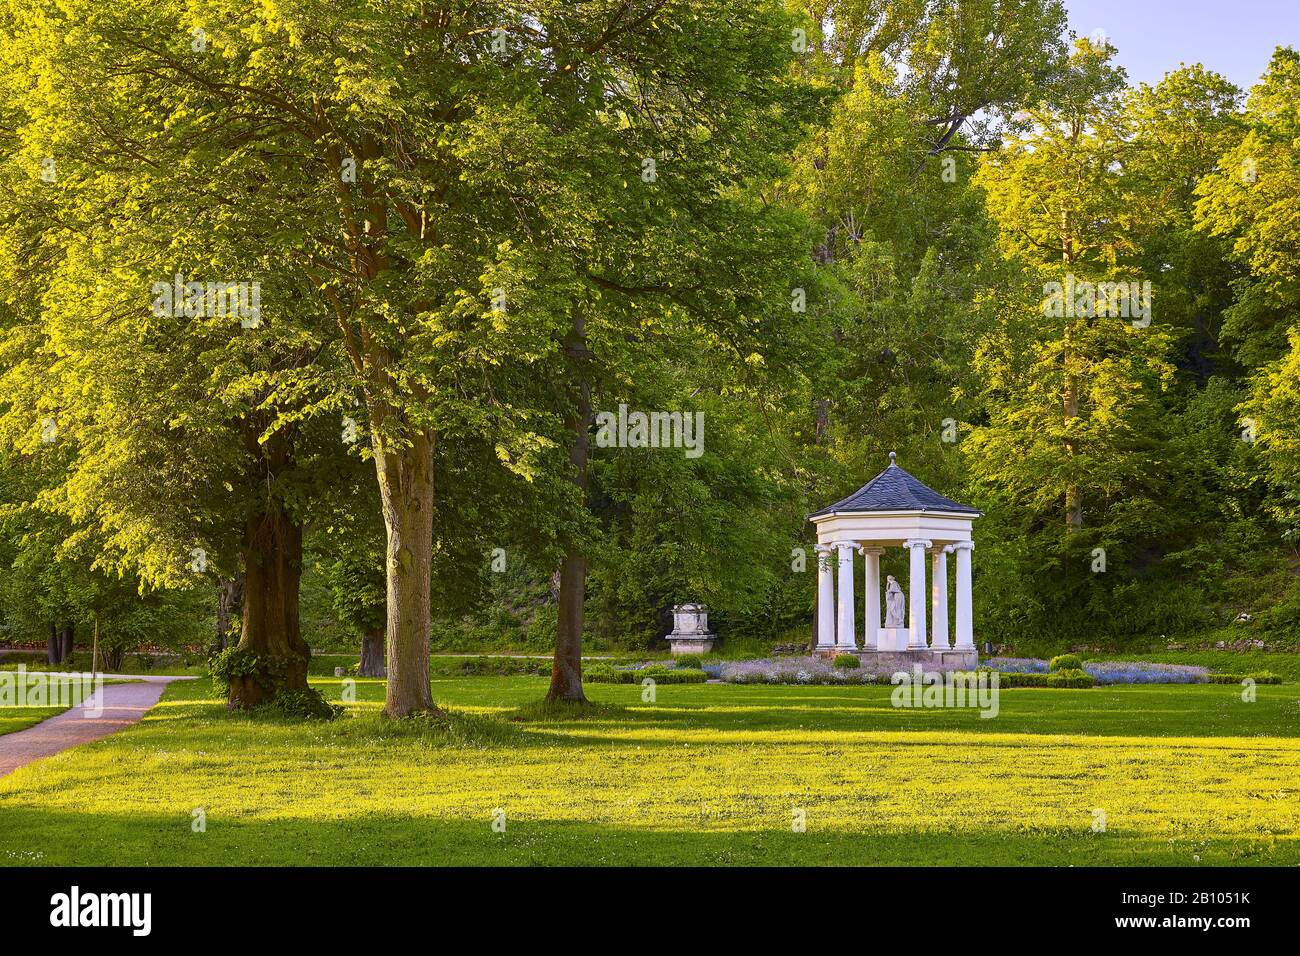 Calligraphic Temple of Calliope in Tiefurter Park, Thuringia, Germany Stock Photo